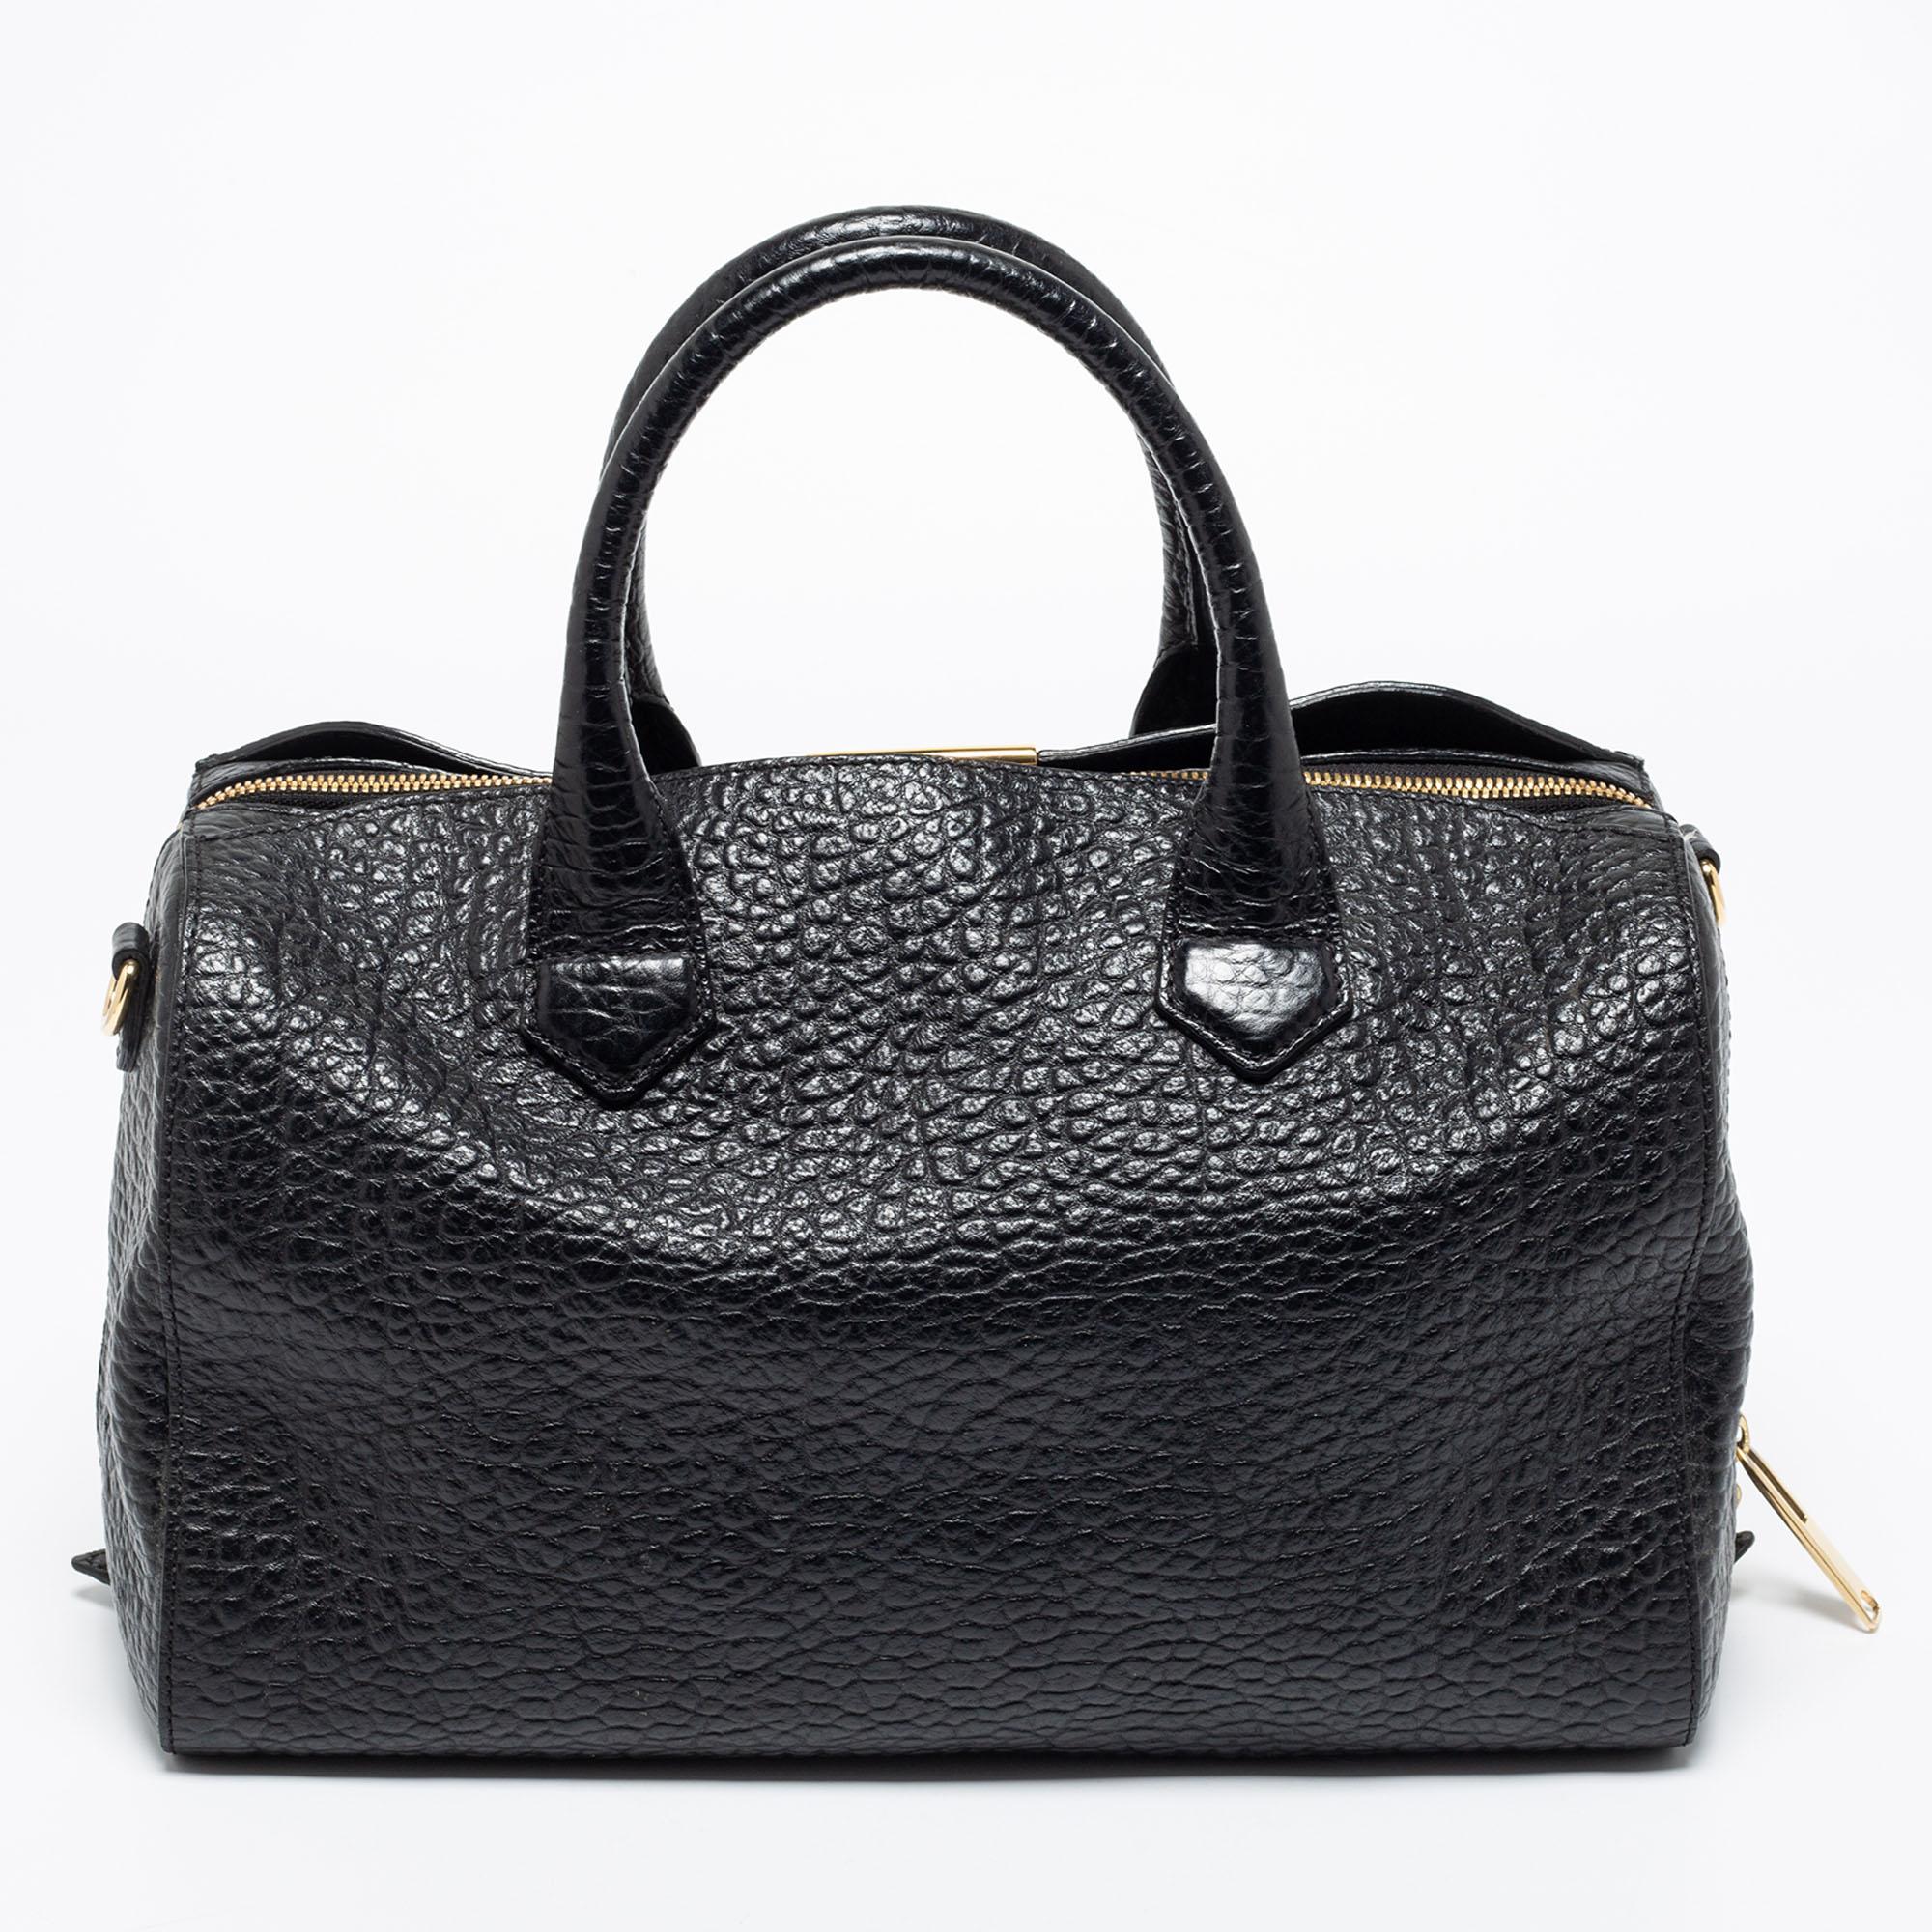 A truly elegant piece to add to your collection, this Boston bag by Burberry comes crafted from black pebbled leather and features a zip closure, handles, and a spacious interior to house your essentials. This bag is a creation for all occasions.

